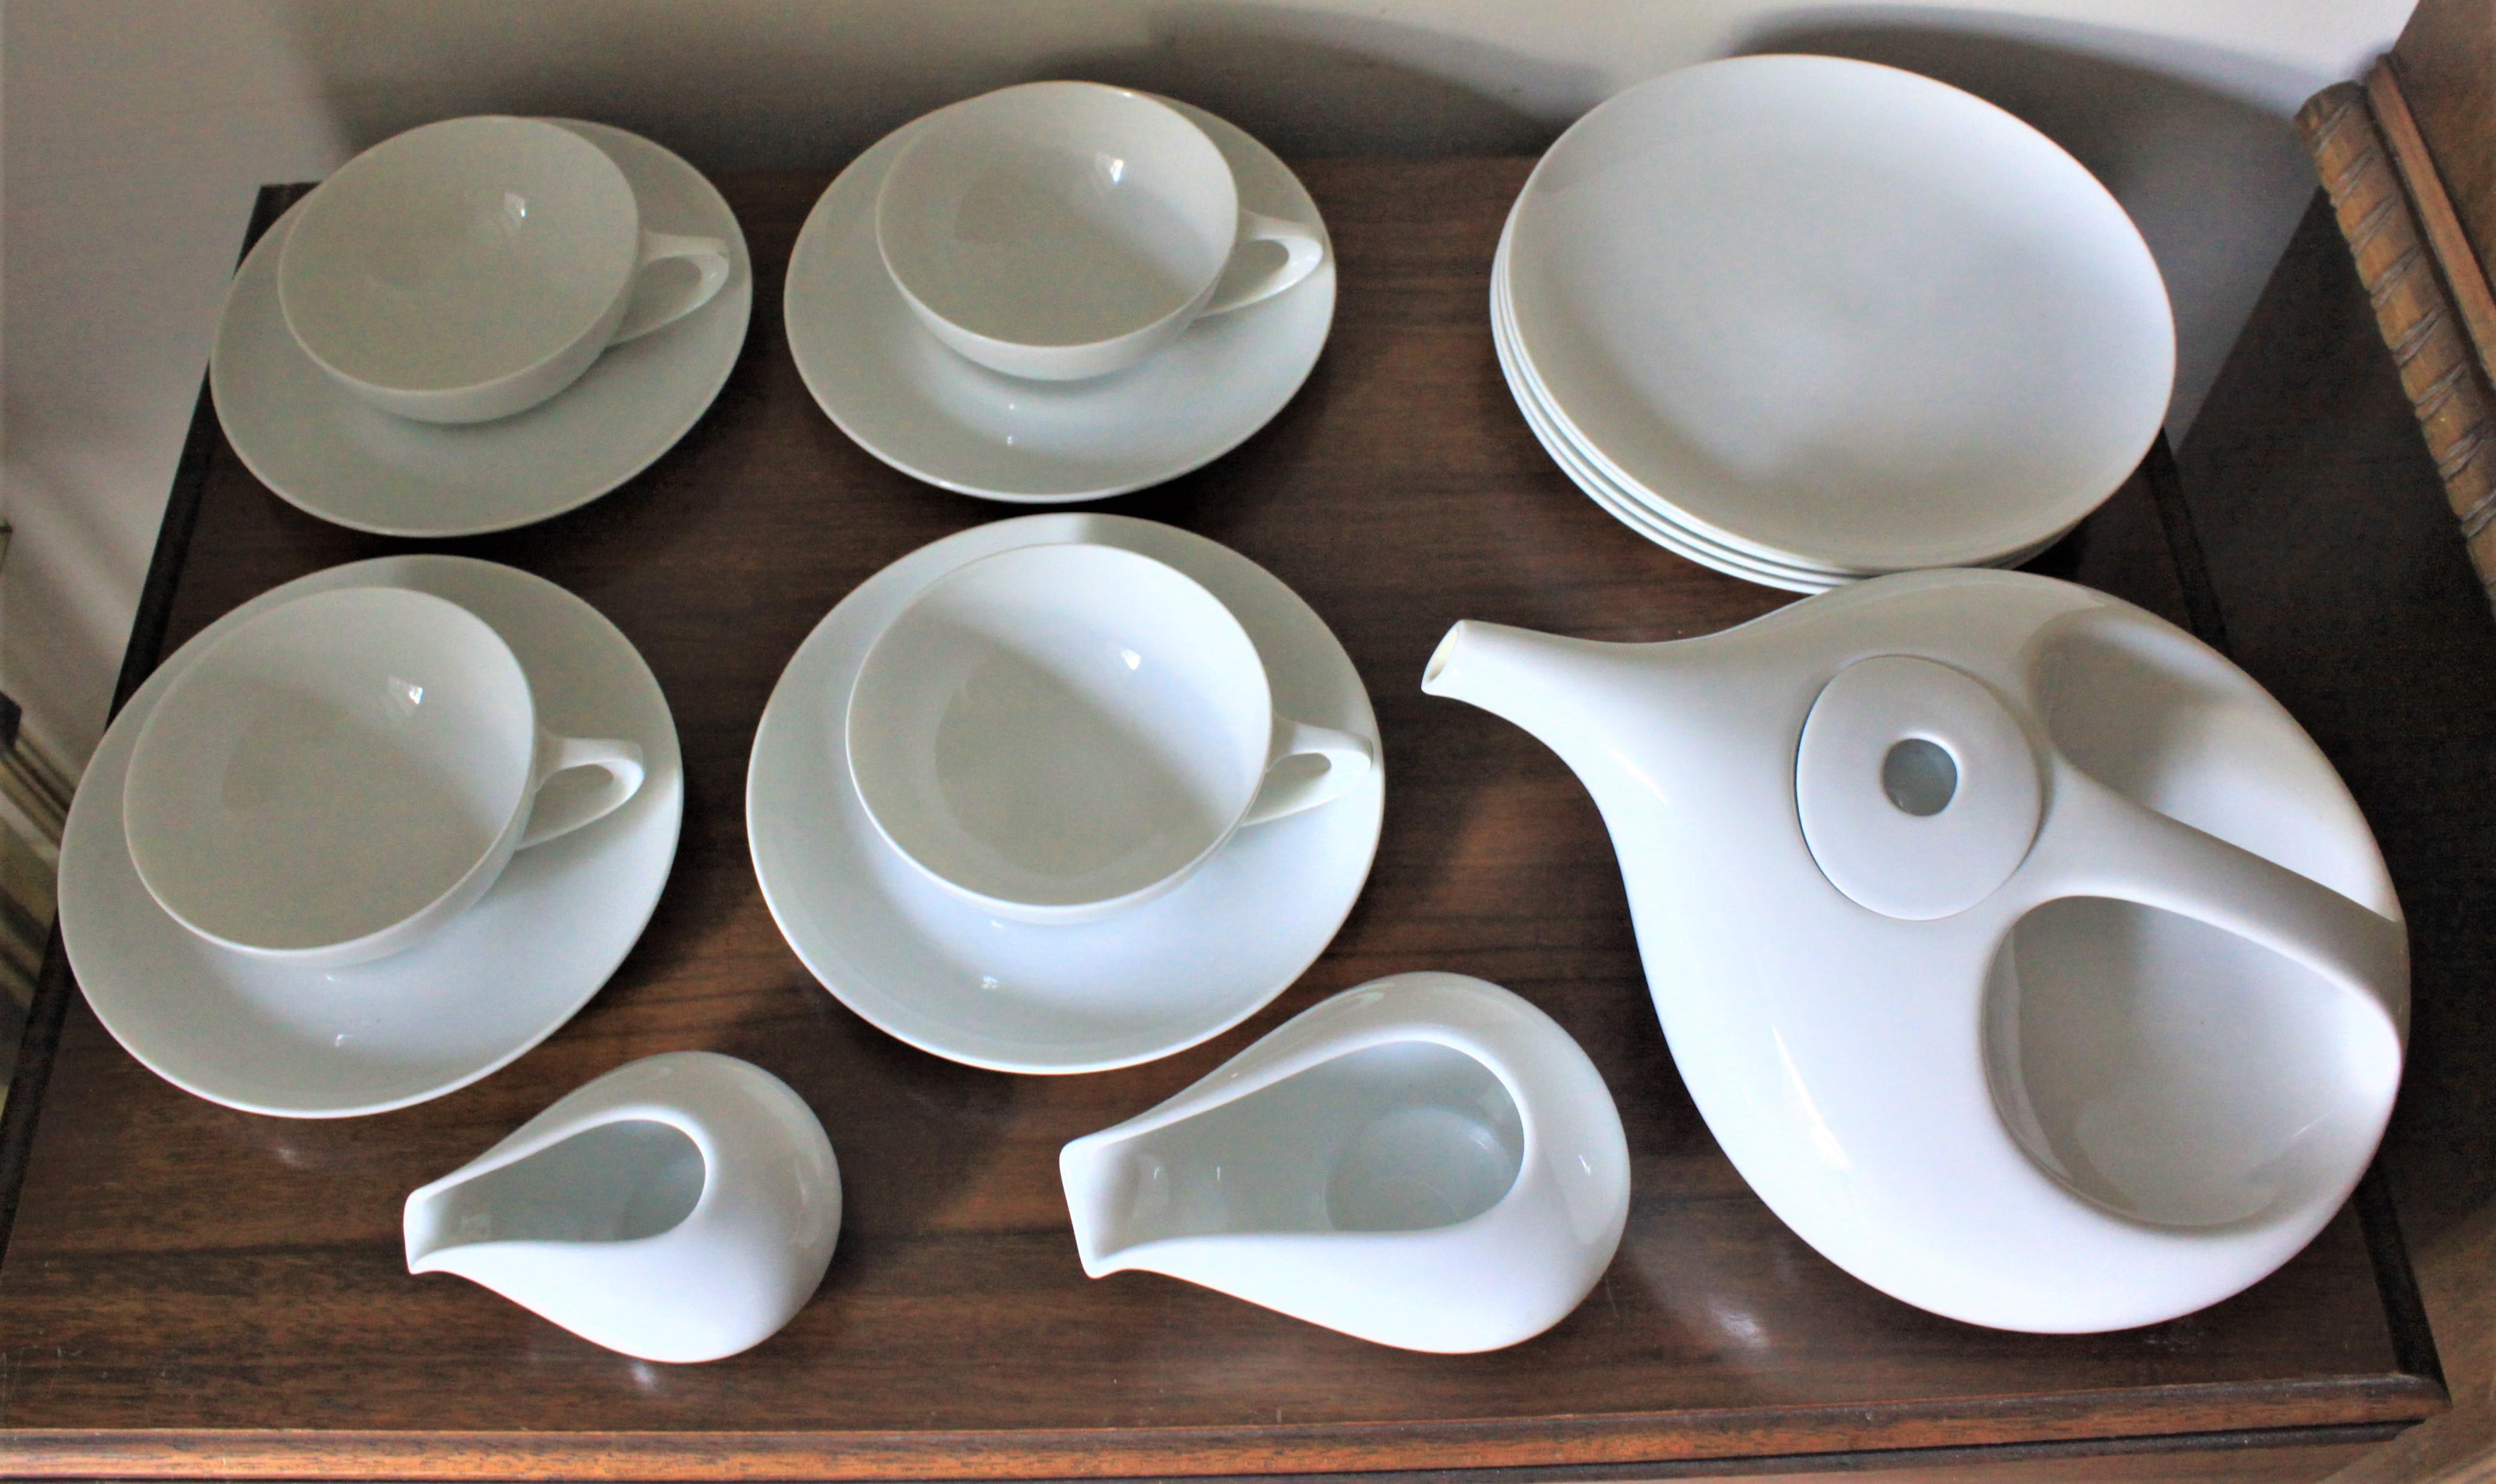 This signed Rosenthal Germany tea or luncheon set was done in white porcelain in the period and style of midcentury modernism. The set includes four tea cups and saucers, four dinner sized plates, a large tea pot and matching cream and sugar bowls.